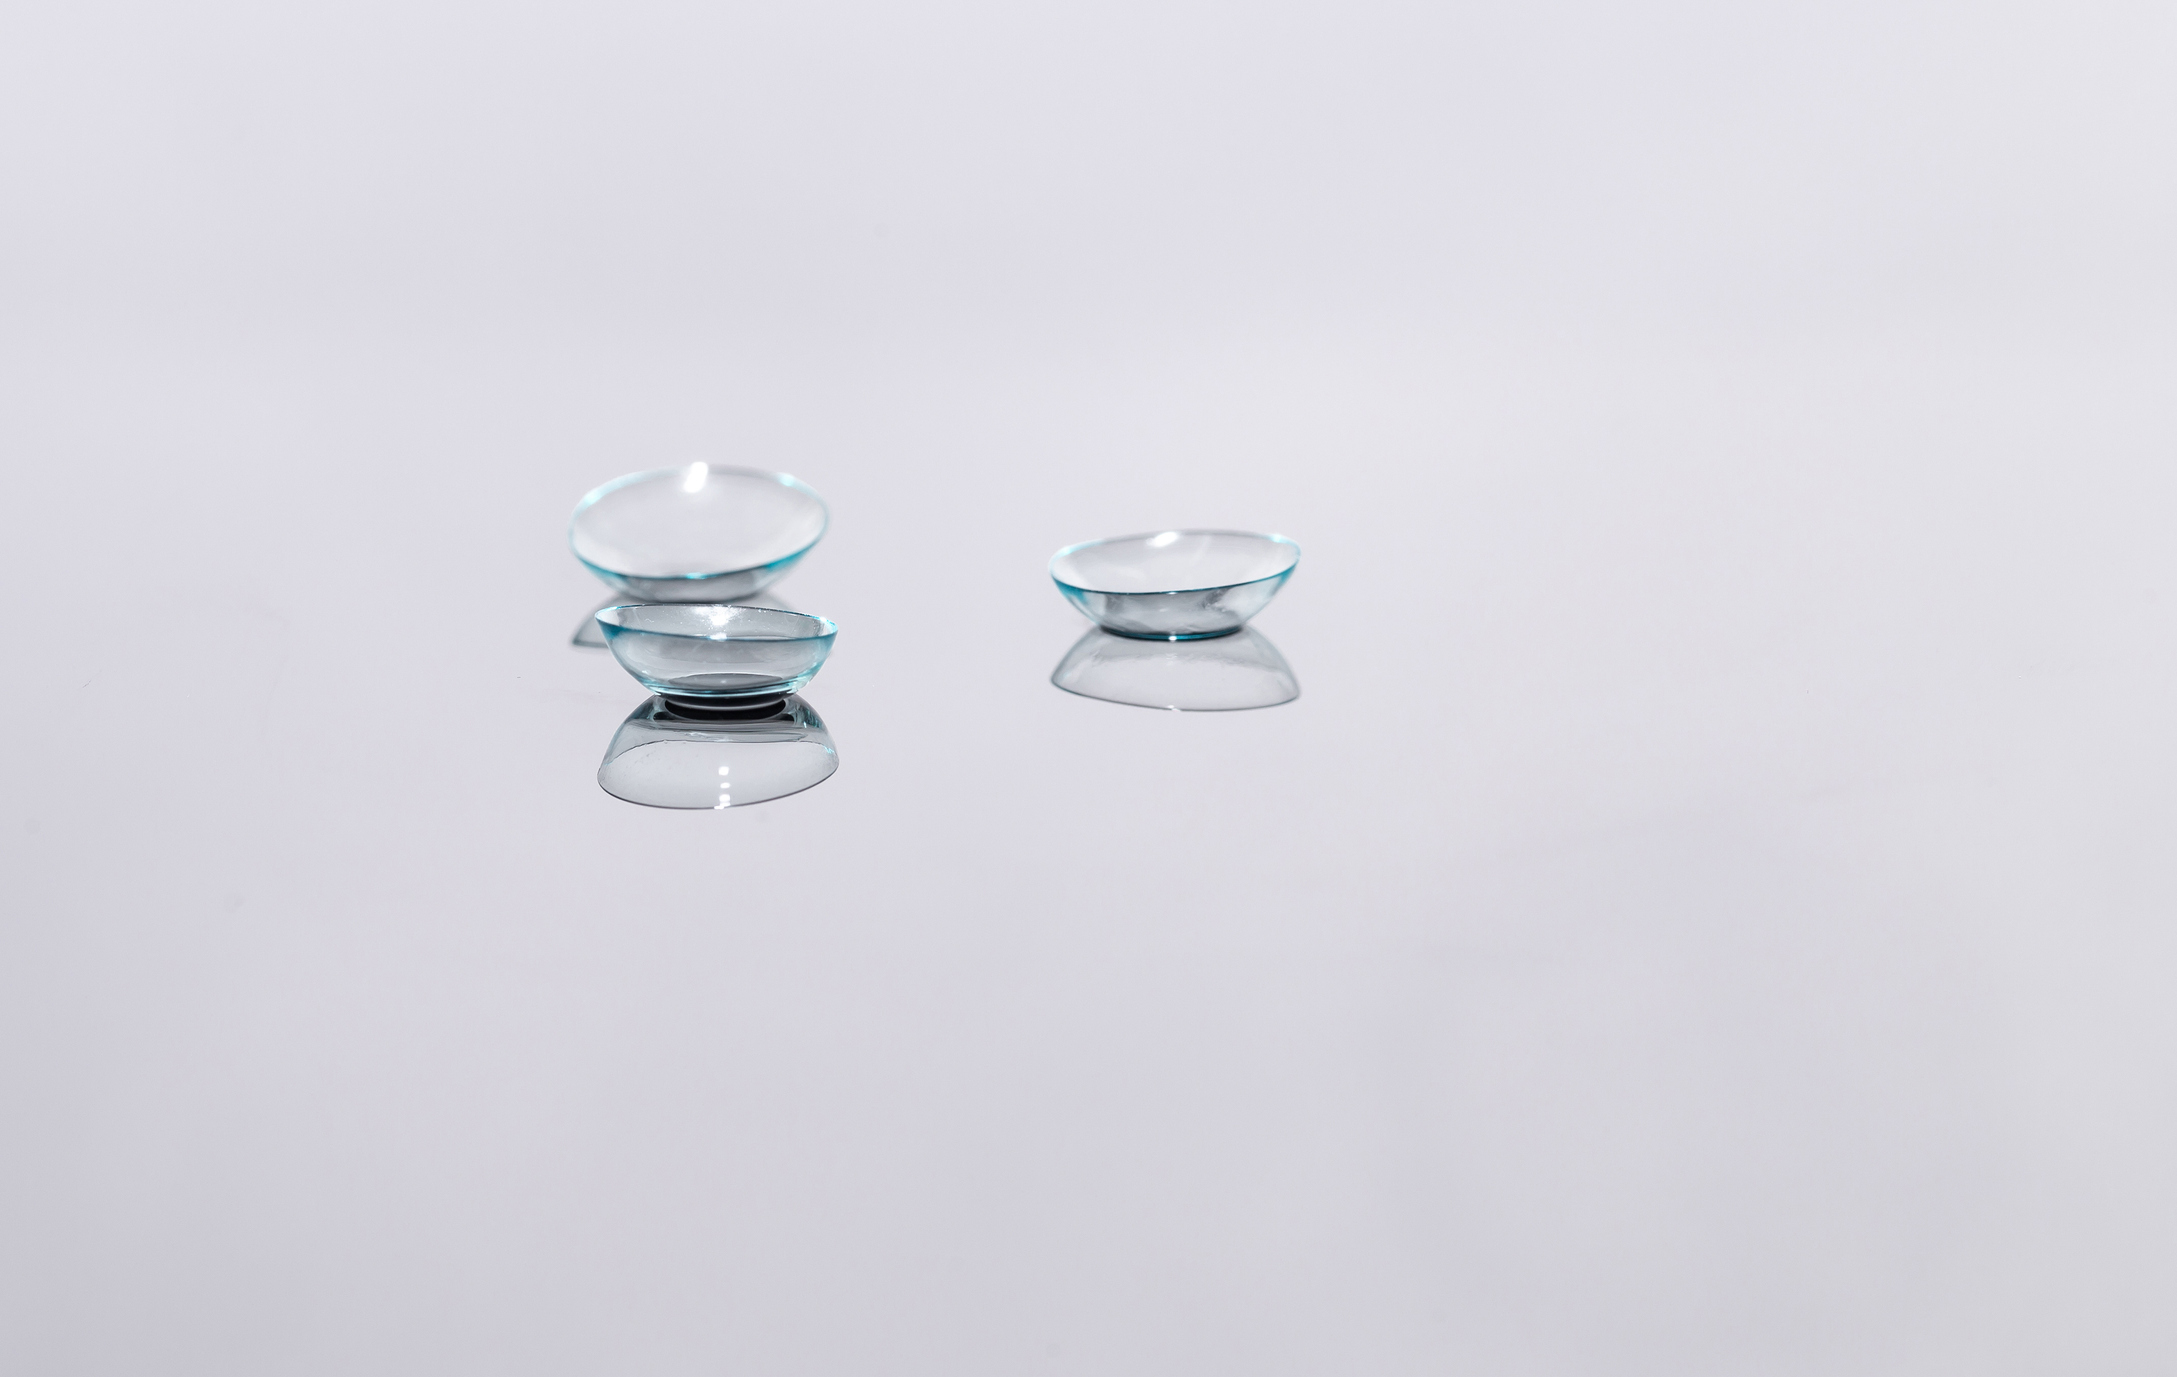 Contact Lenses On White Background 3